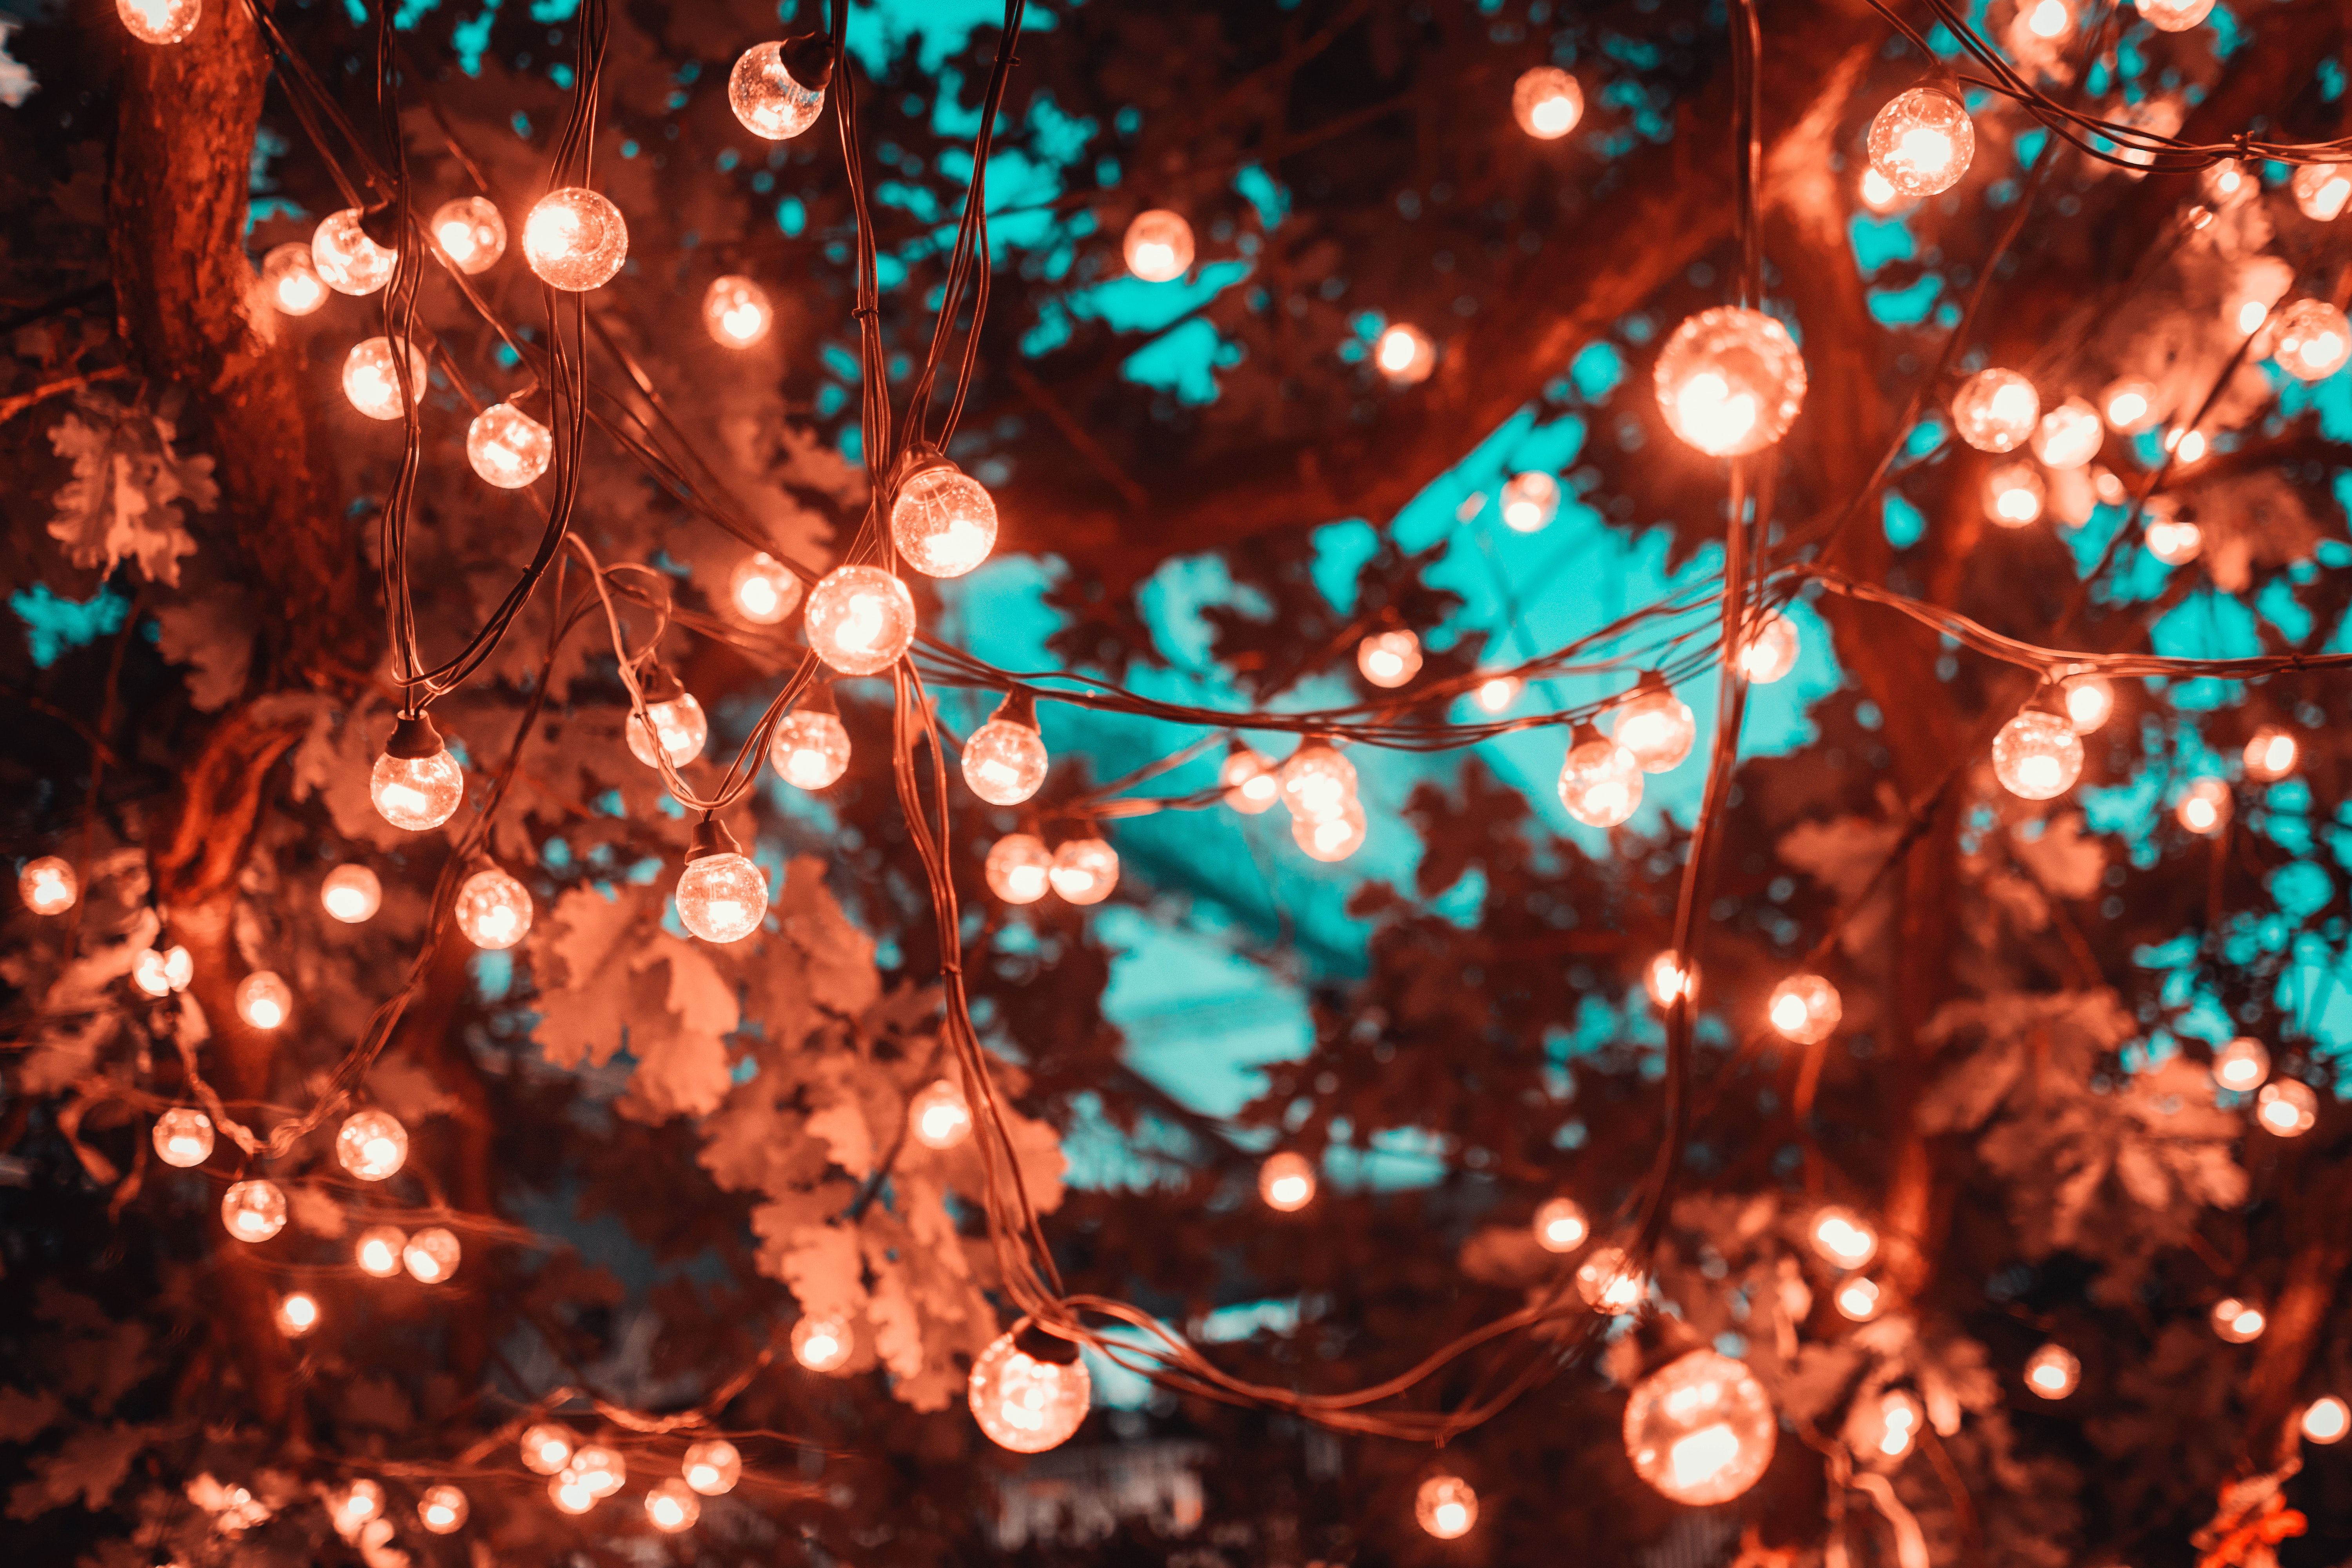 A tree with lights hanging from it - Christmas lights